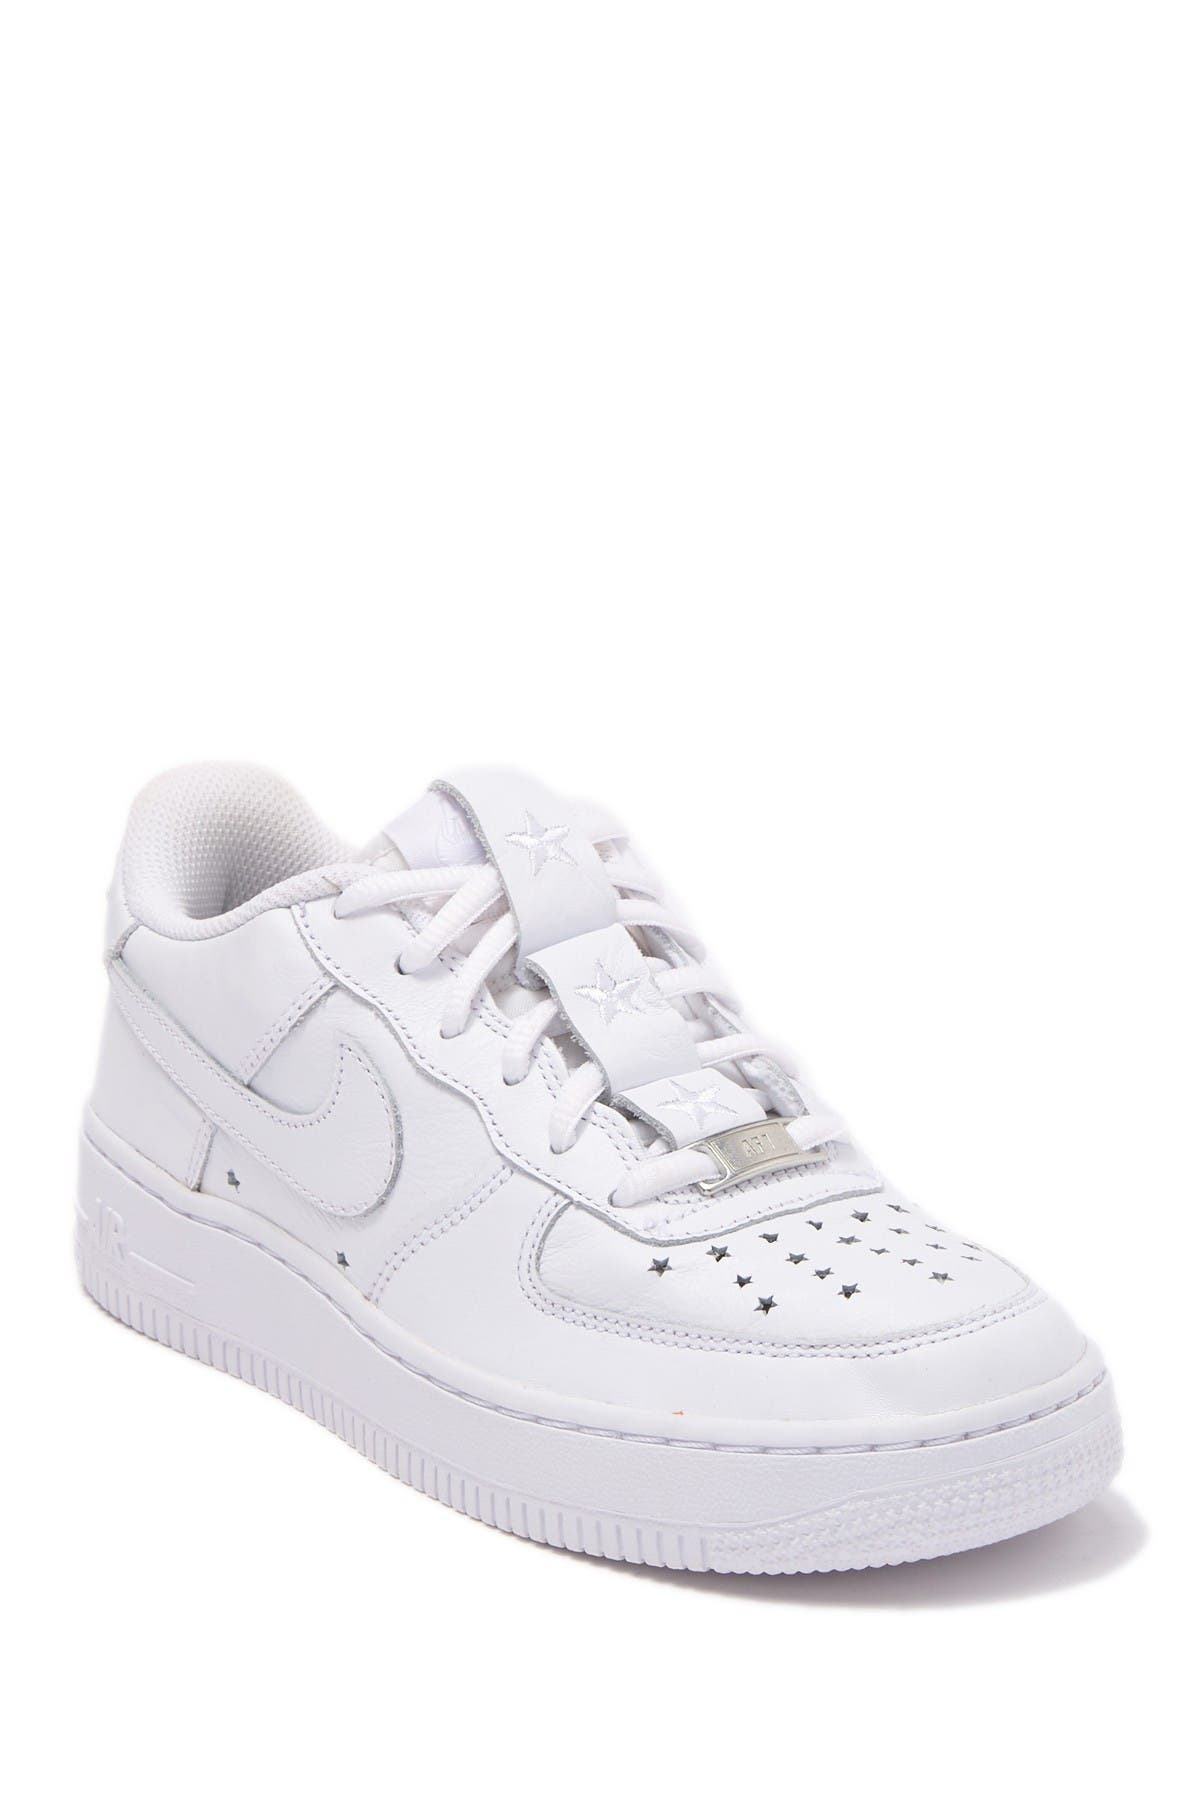 nike air force 1 womens white nordstrom